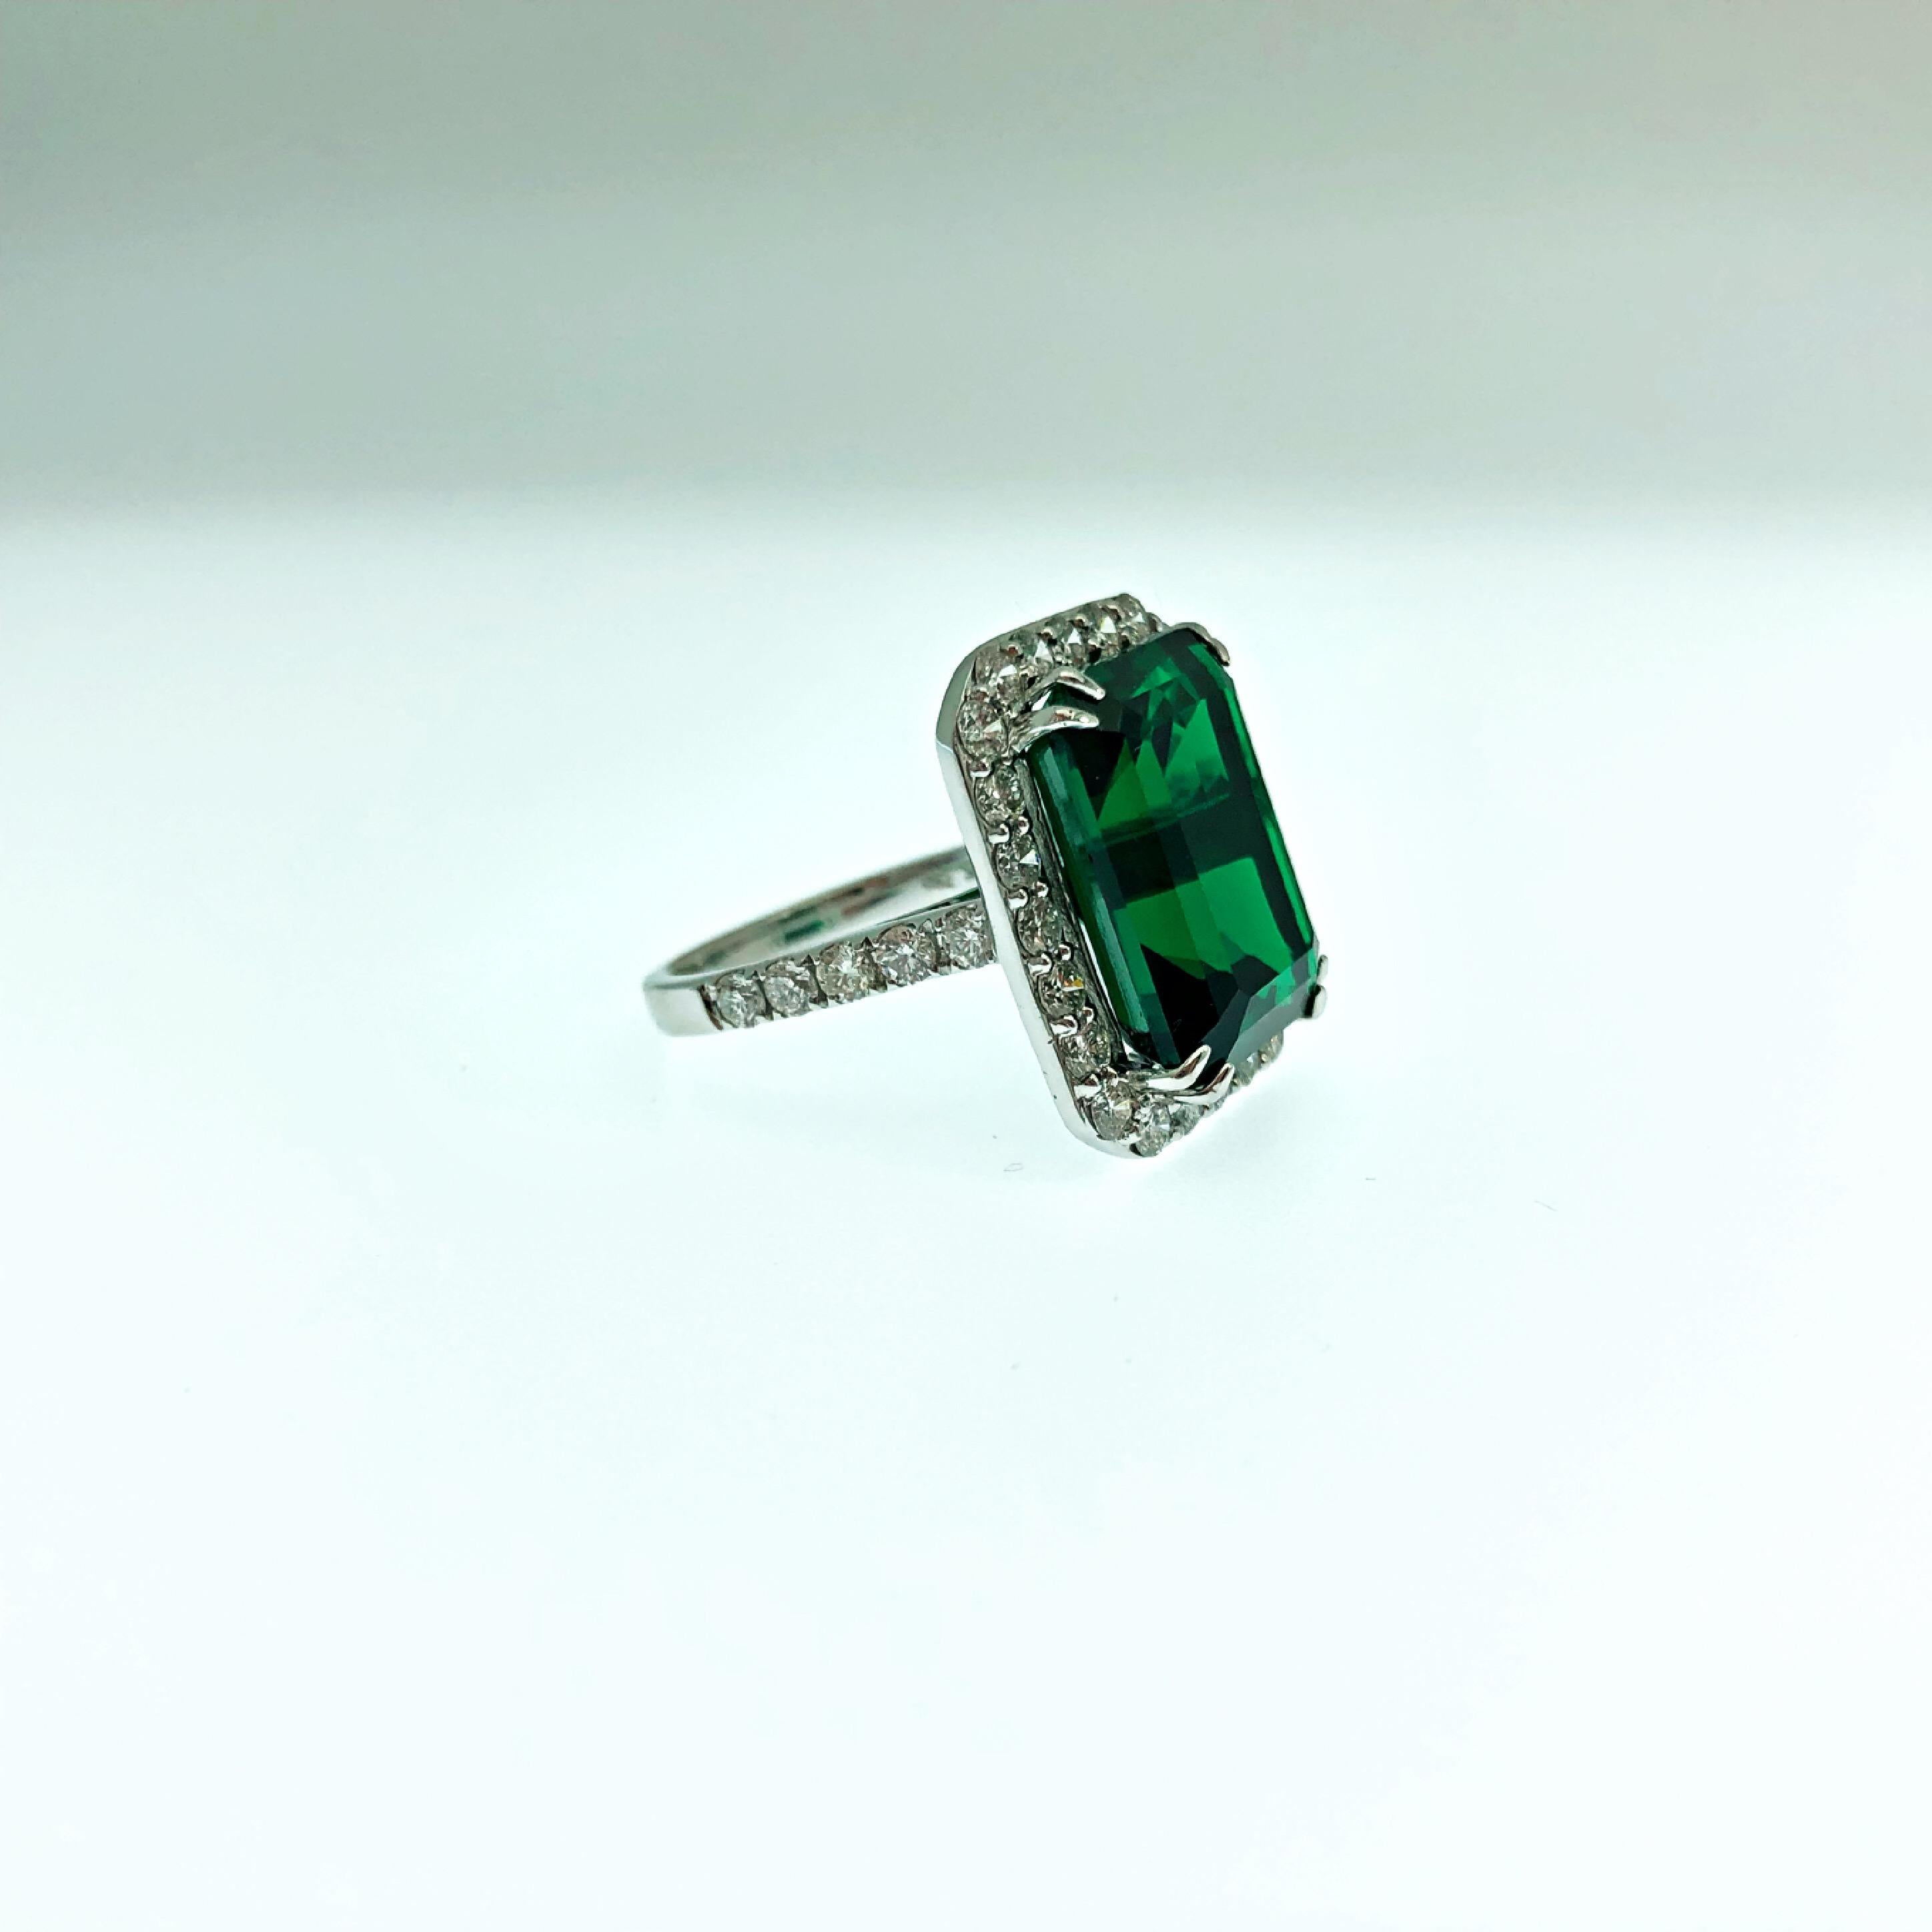 It doesn't get any more classy and elegant than this!
Large cocktail ring featuring a LAB grown synthetic deep vivid green emerald of 13.51ct and brilliant cut natural diamonds of 1.63ct.
The perfect statement ring for your next event, sparkly